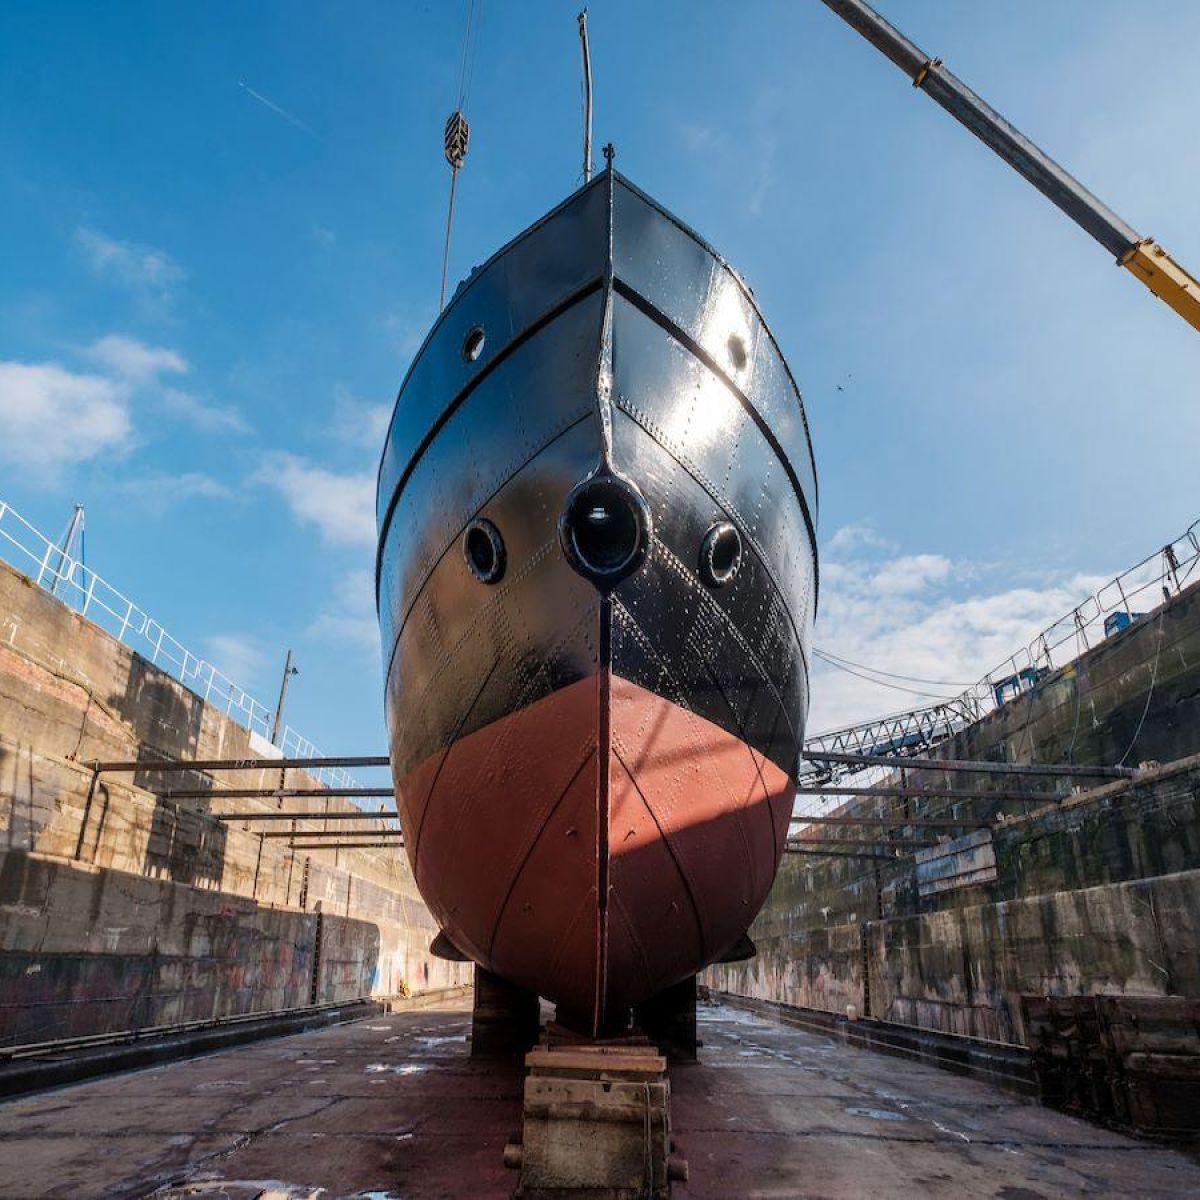 Spurn Lightship in dry dock after painting